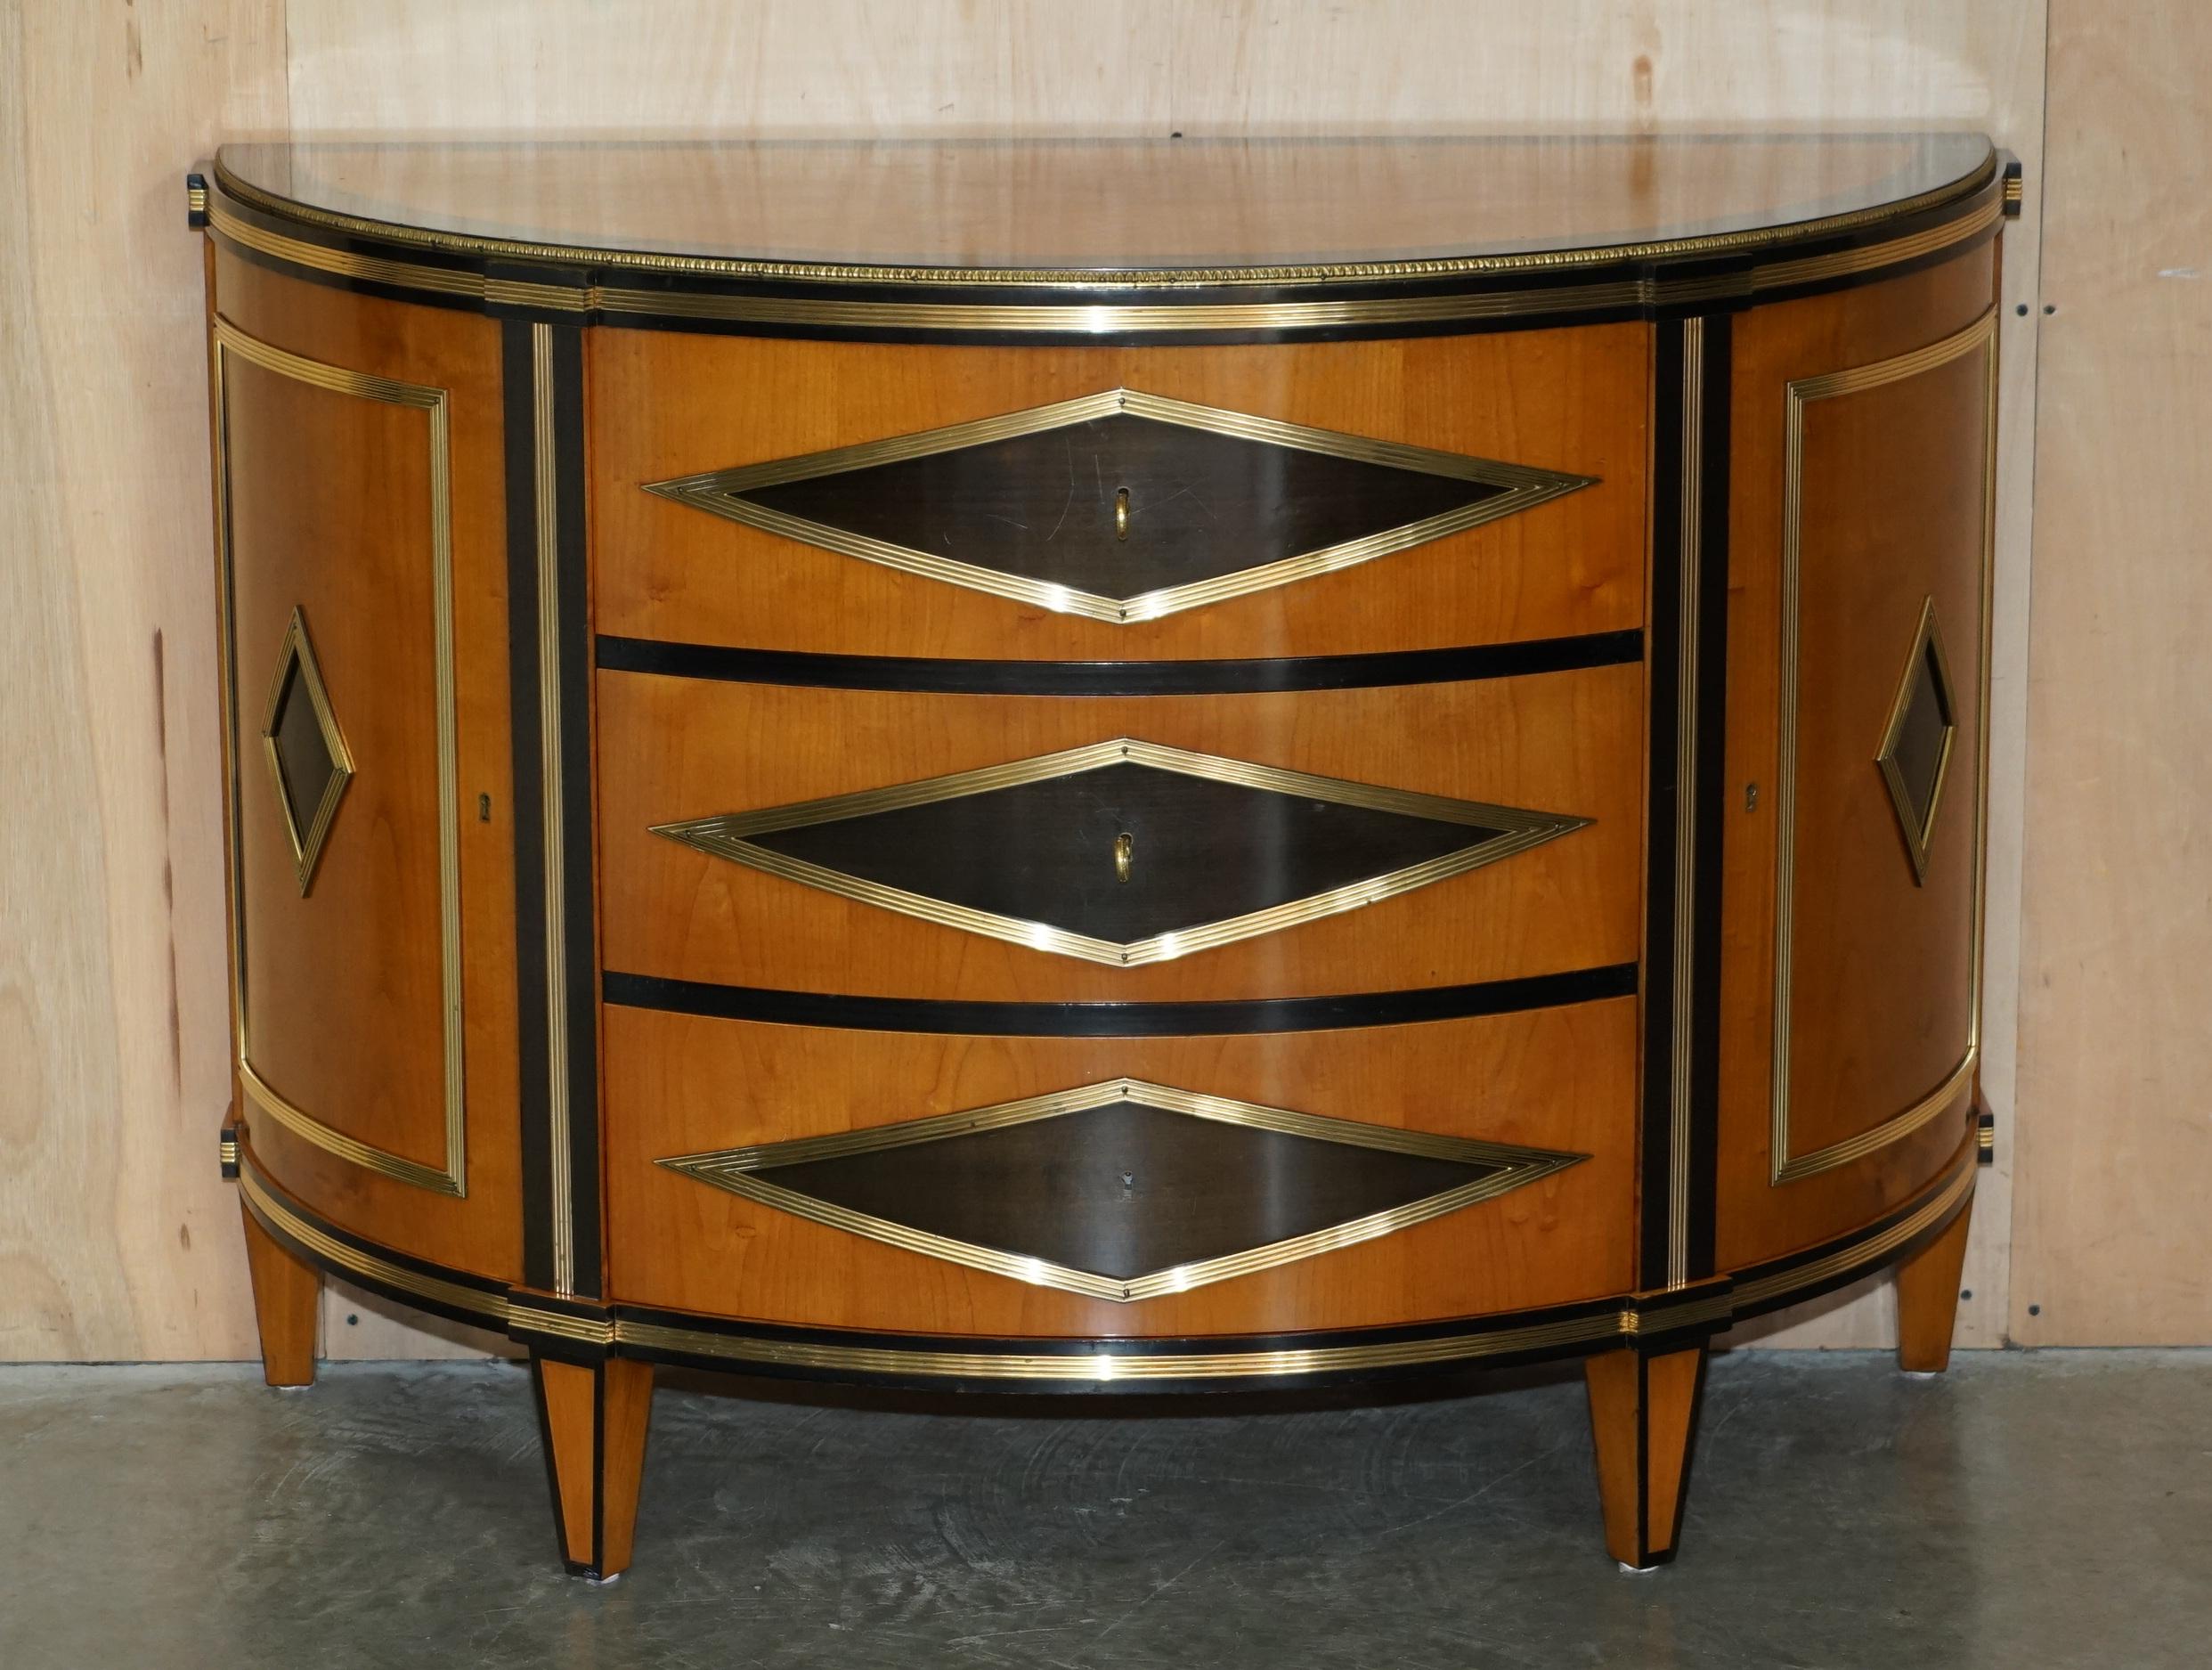 Royal House Antiques

Royal House Antiques is delighted to offer for sale these absolutely stunning, hand made in Italy Colombo Mobili Empire style Satinwood & gilt brass demi lune sideboard chest of drawers 

Please note the delivery fee listed is